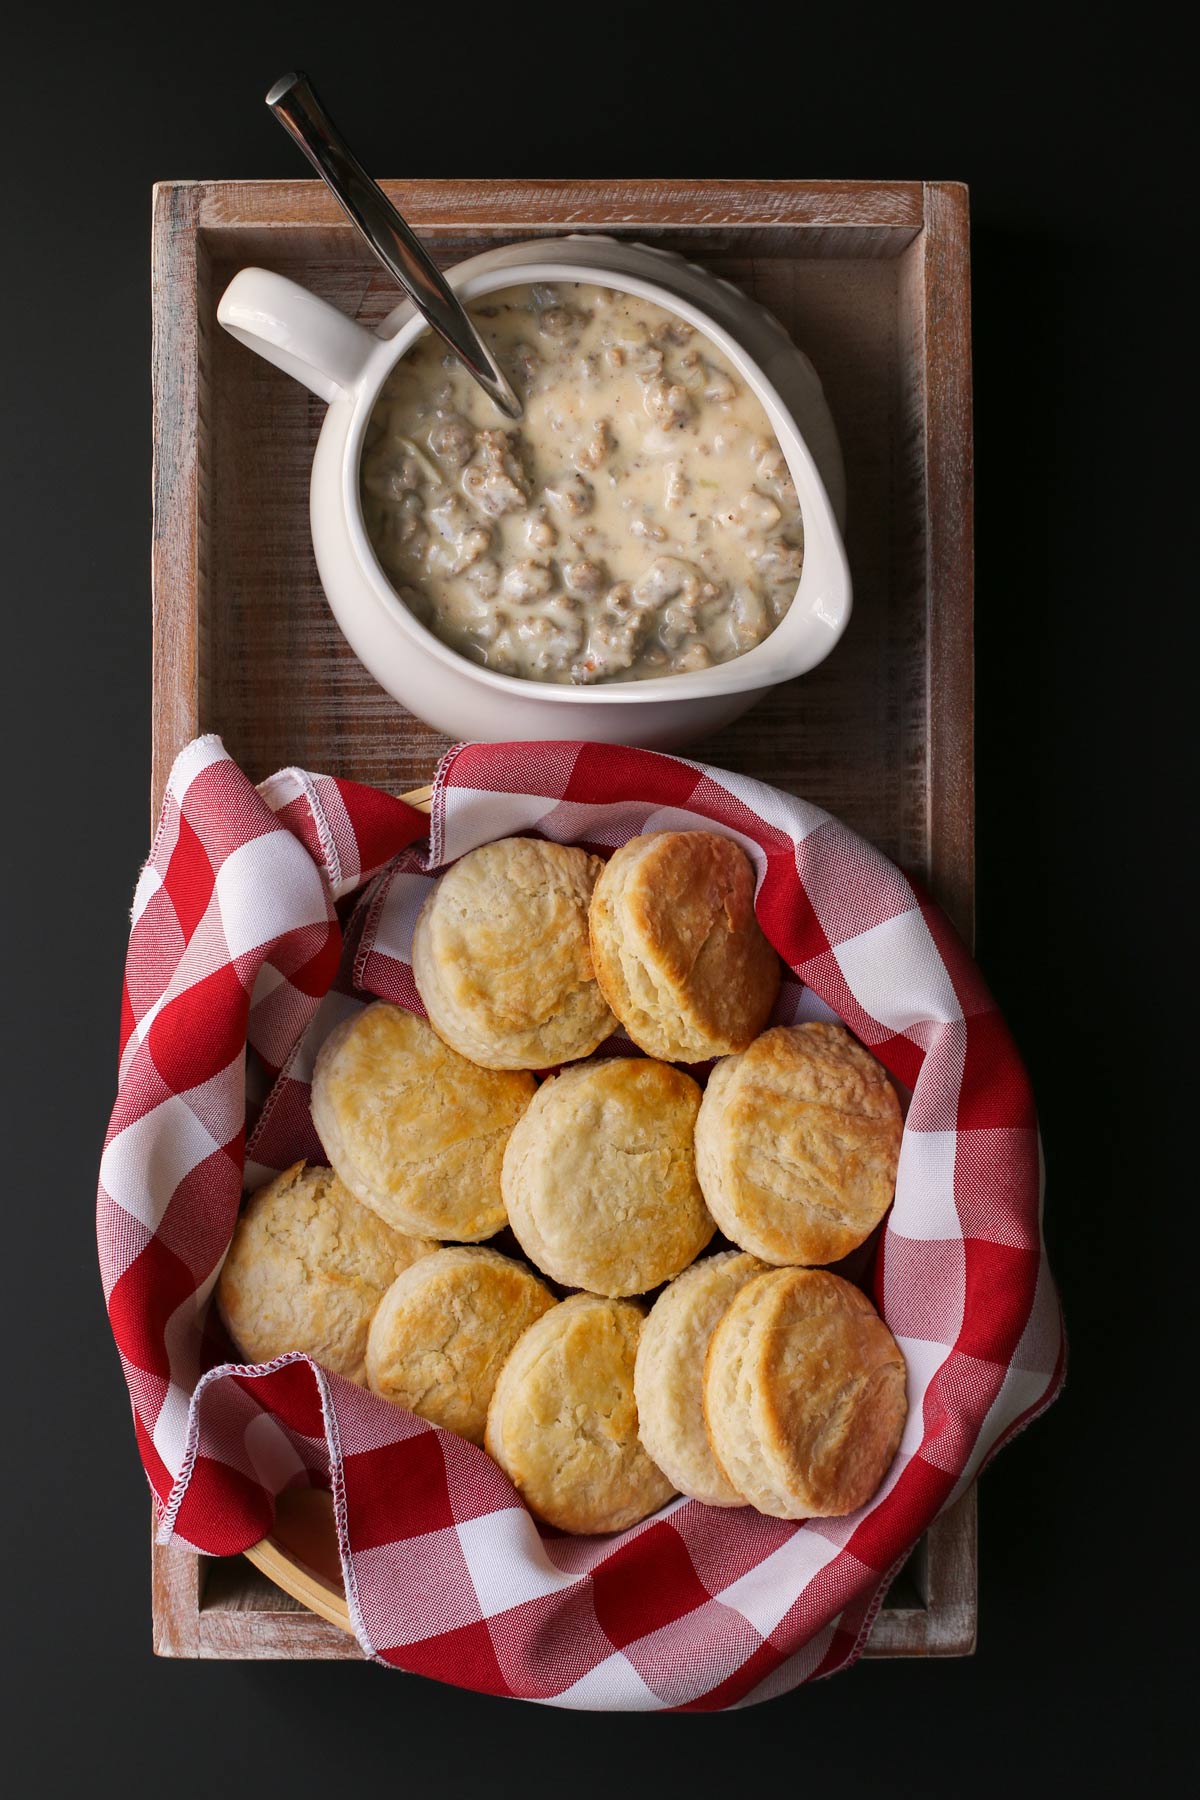 tray with a basket of biscuits and a saucier of gravy.